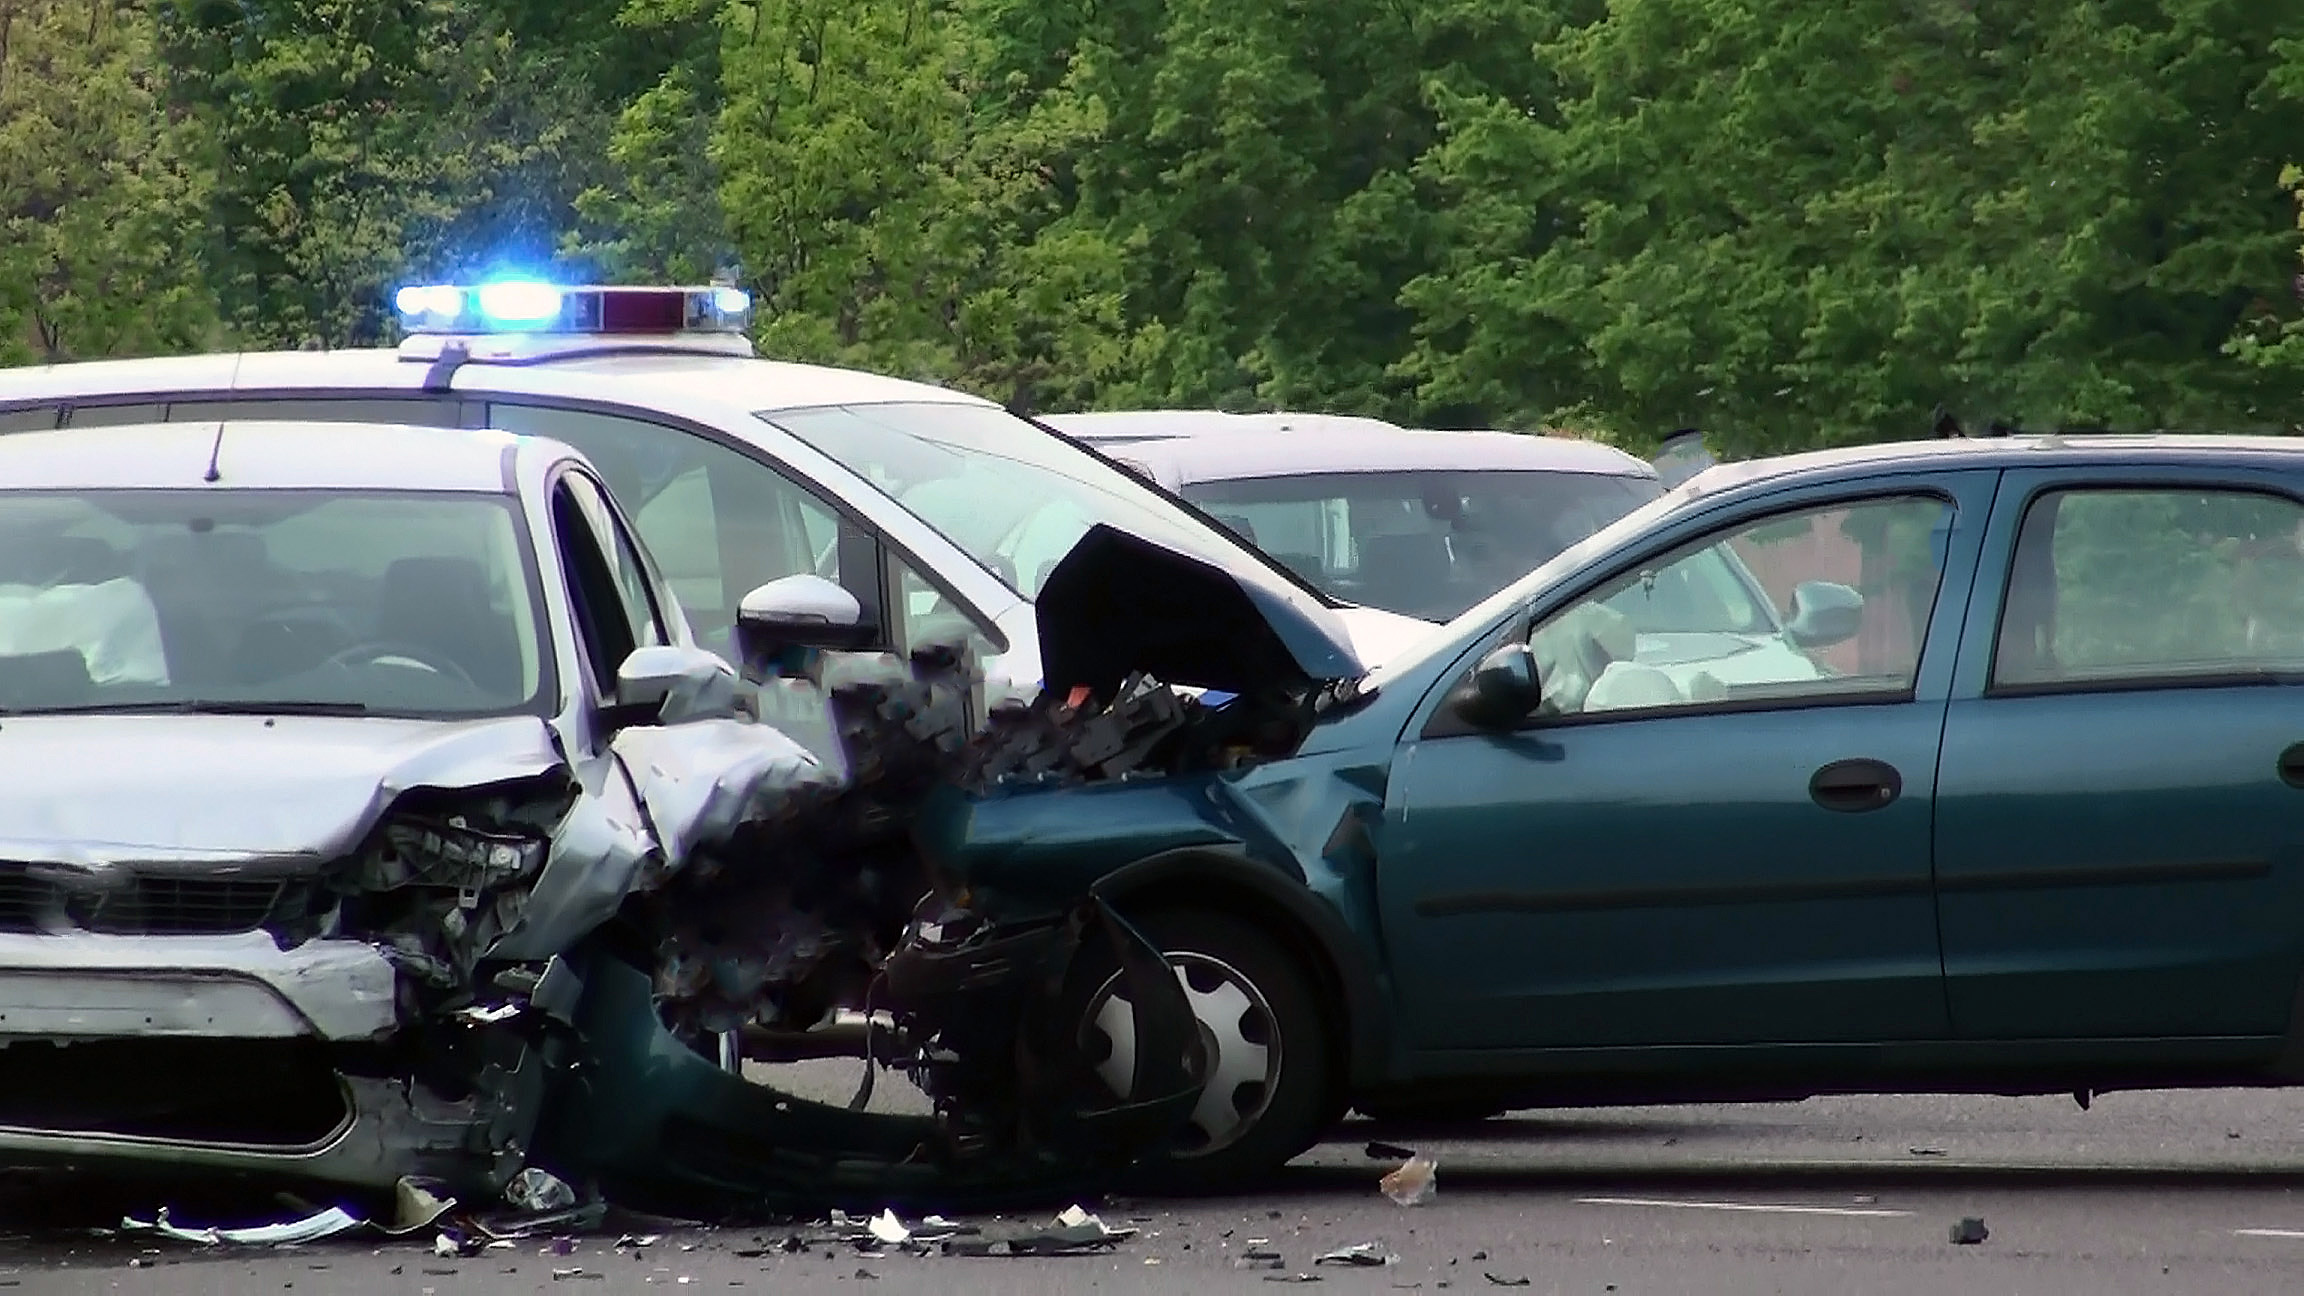 How Much Damage Occurs in a 30 MPH Crash? - Personal Injury 360